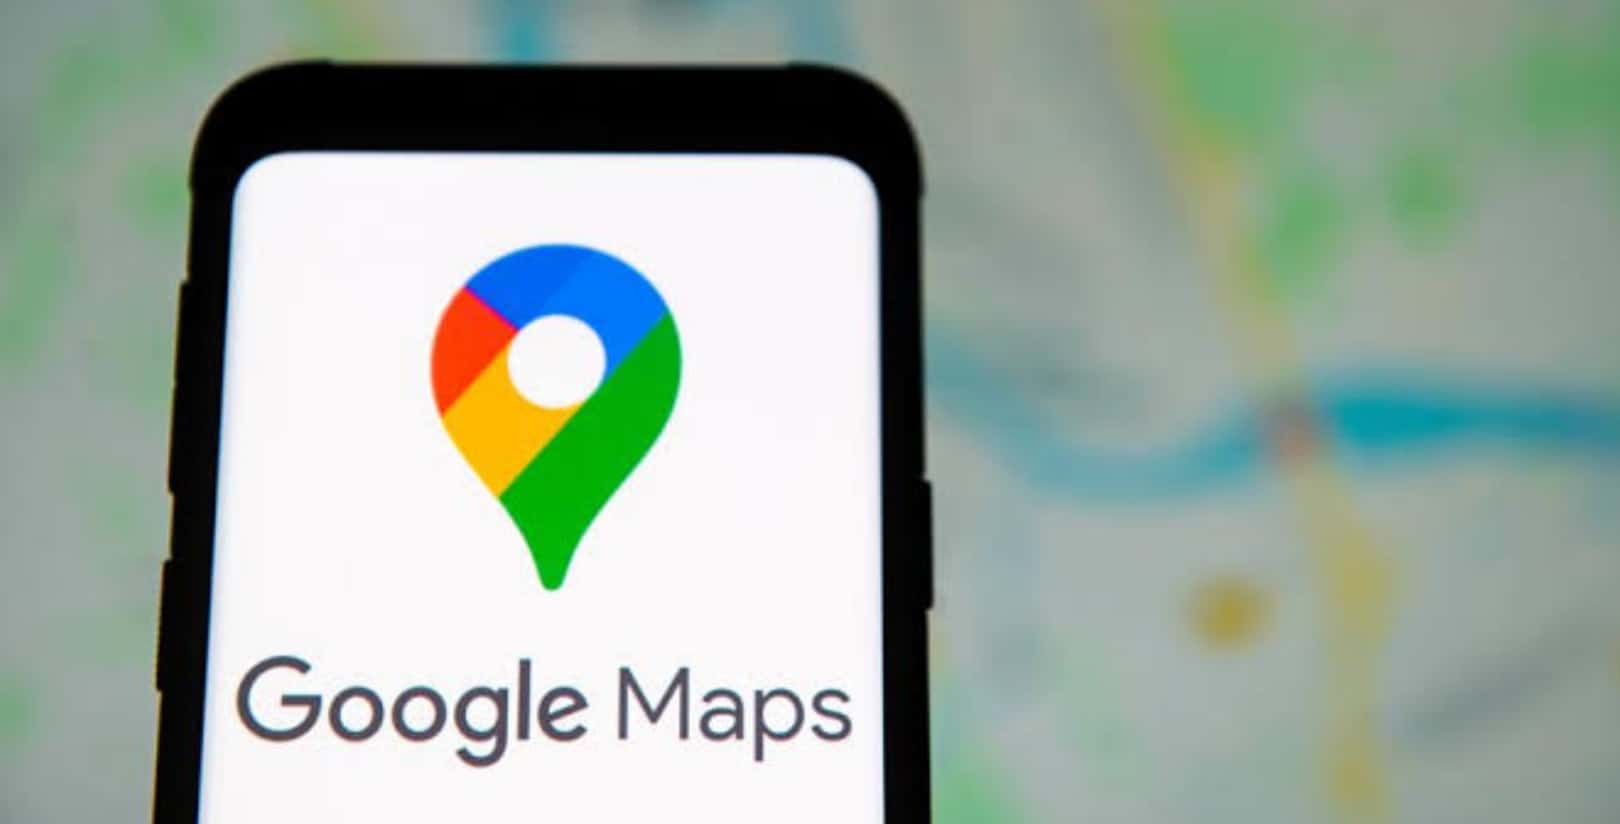 Google Maps Reportedly Adds Railroad Crossing Alerts During Navigation